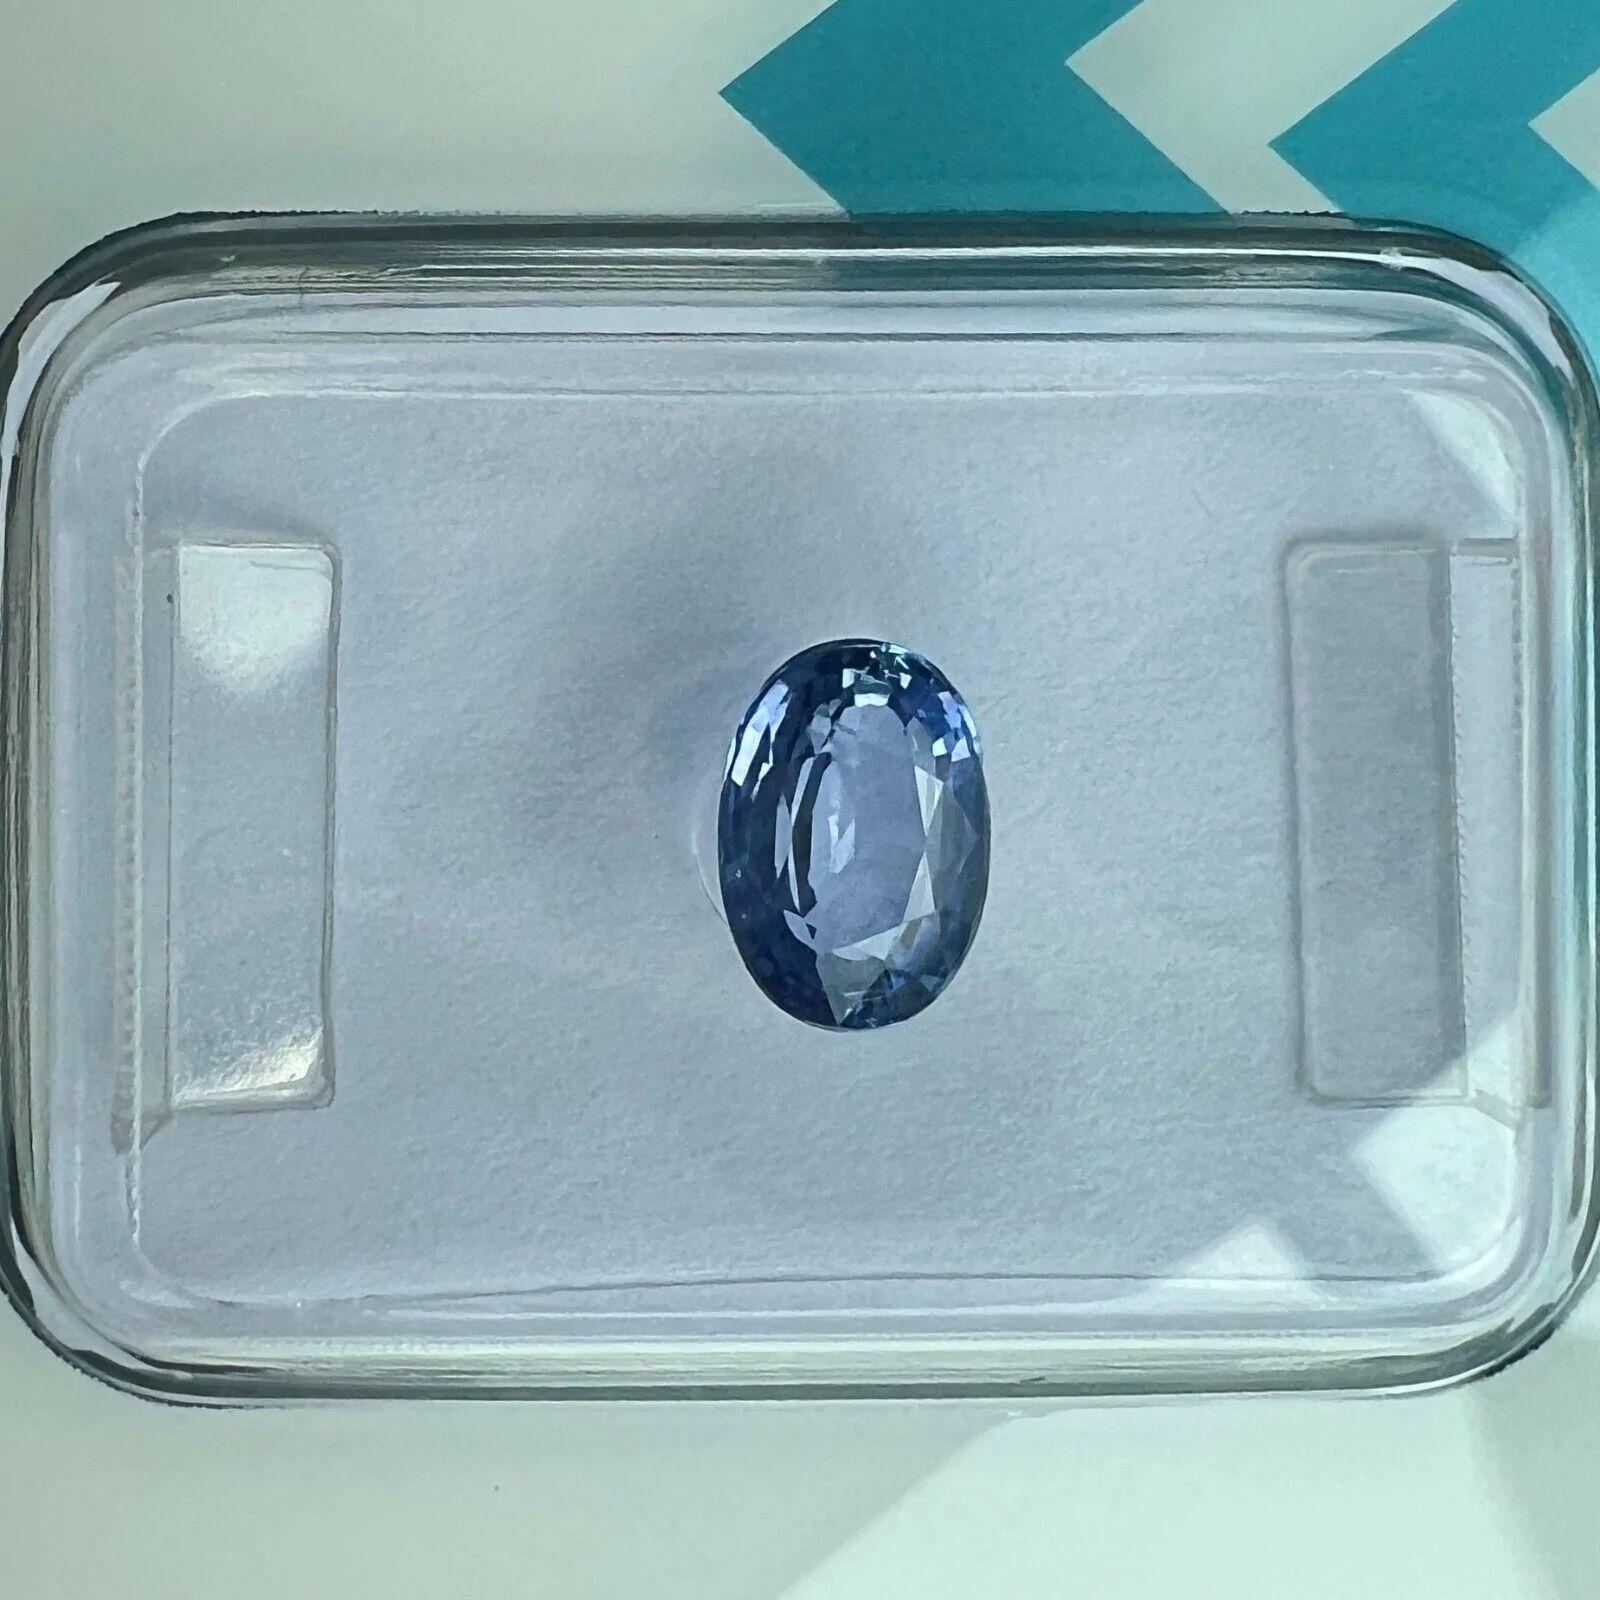 1.05ct Vivid Blue Ceylon Sapphire IGI Certified Oval Cut Loose Gem 6.5x4.5mm

Fine Blue Ceylon Sapphire In IGI Blister.
1.05 Carat stone with a beautiful vivid blue colour.
Also has an excellent oval cut and excellent clarity, very clean